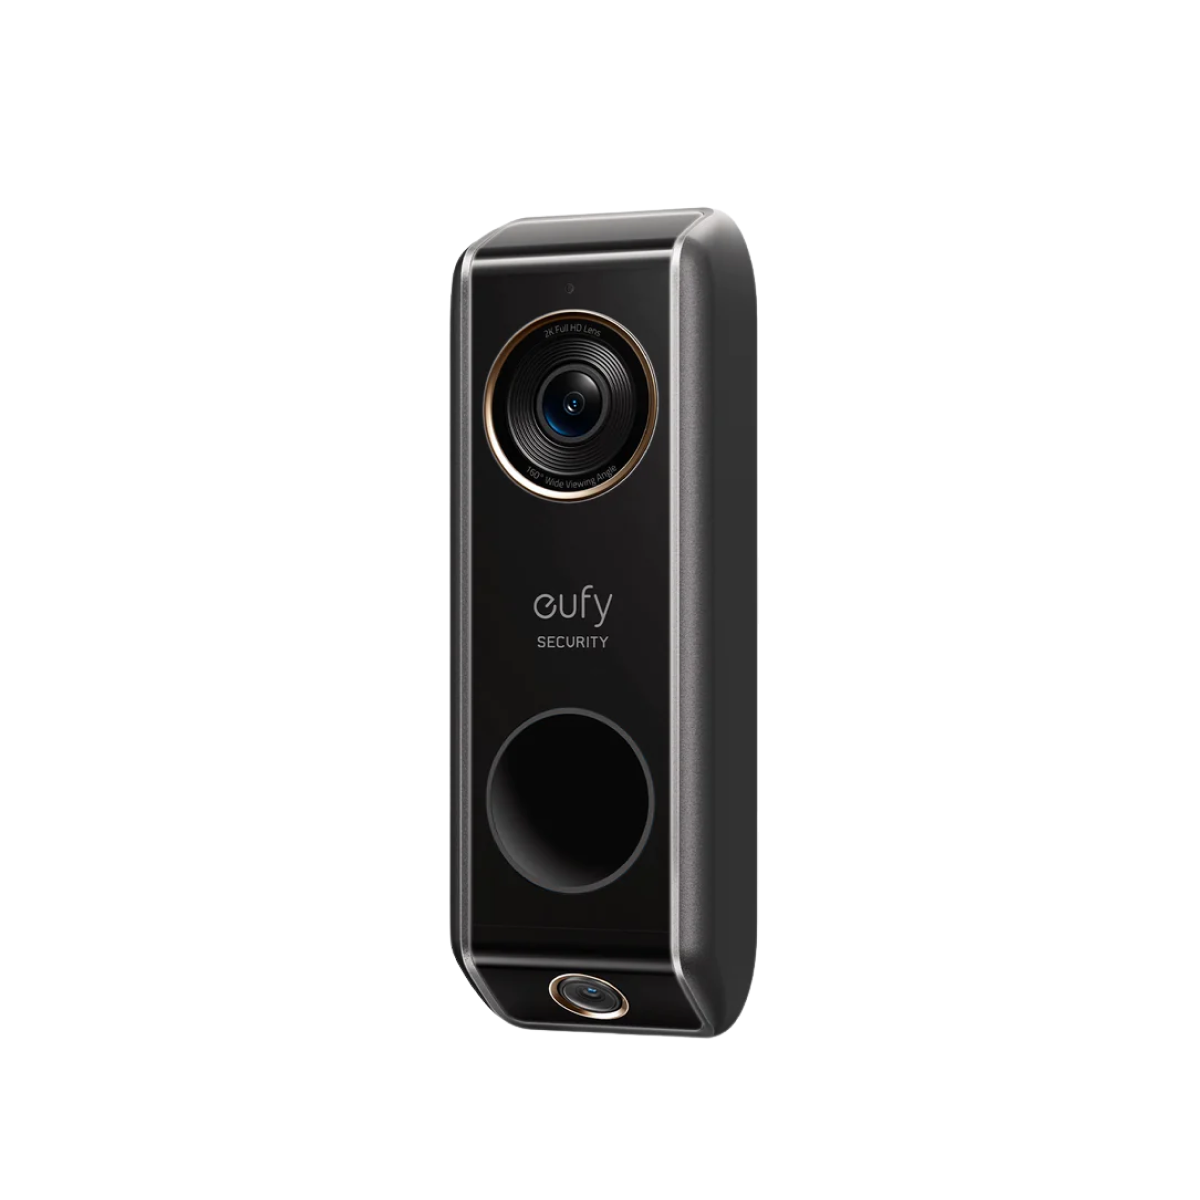 Eufy Security Video Doorbell E340 review: dual-camera protection